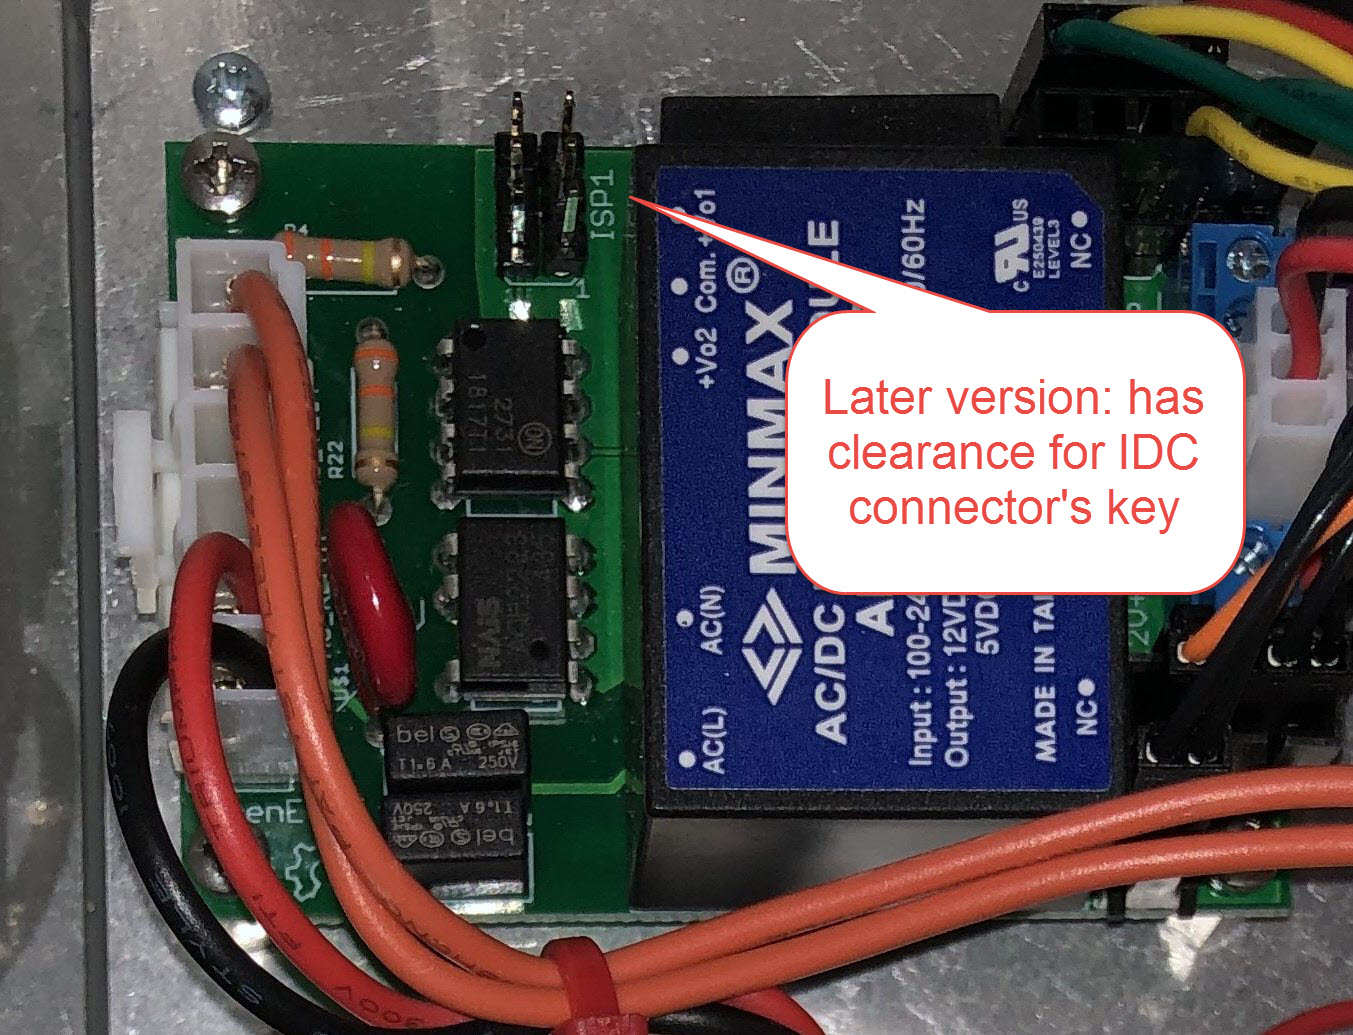 Later OpenEVSE controller, showing the DC-DC converter has been moved to allow room for ISP IDC connector key.